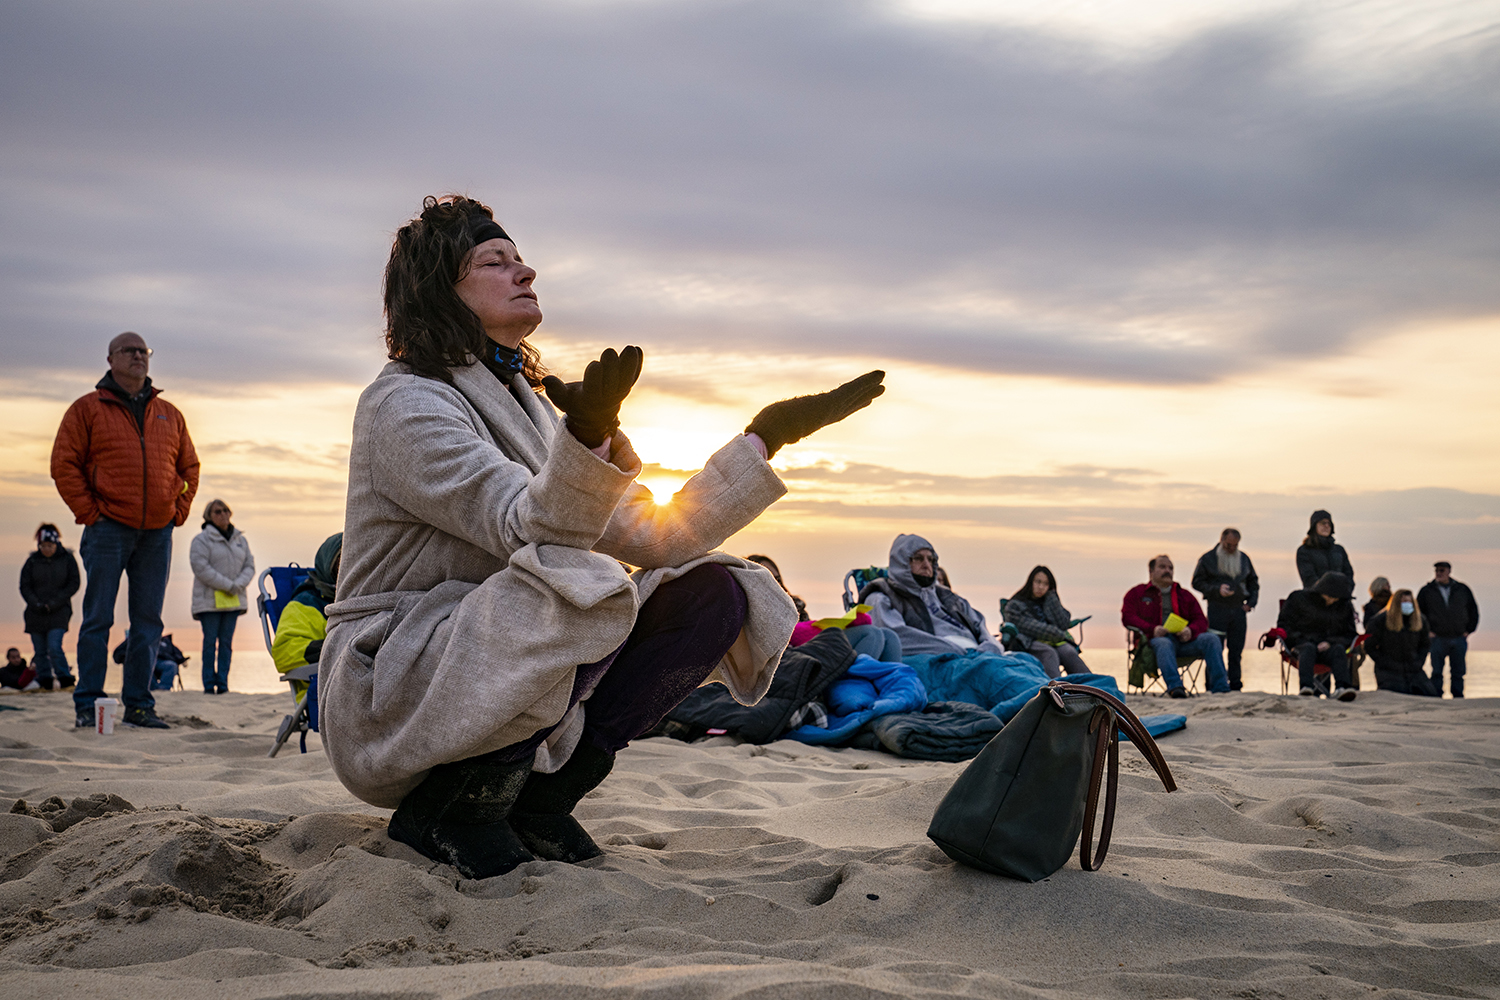 Parishioners gather on a beach for an Easter Sunday service at sunrise hosted by Hope Community Church of Manasquan, Sunday, April 4, 2021, in Manasquan, N.J. (AP Photo/John Minchillo)